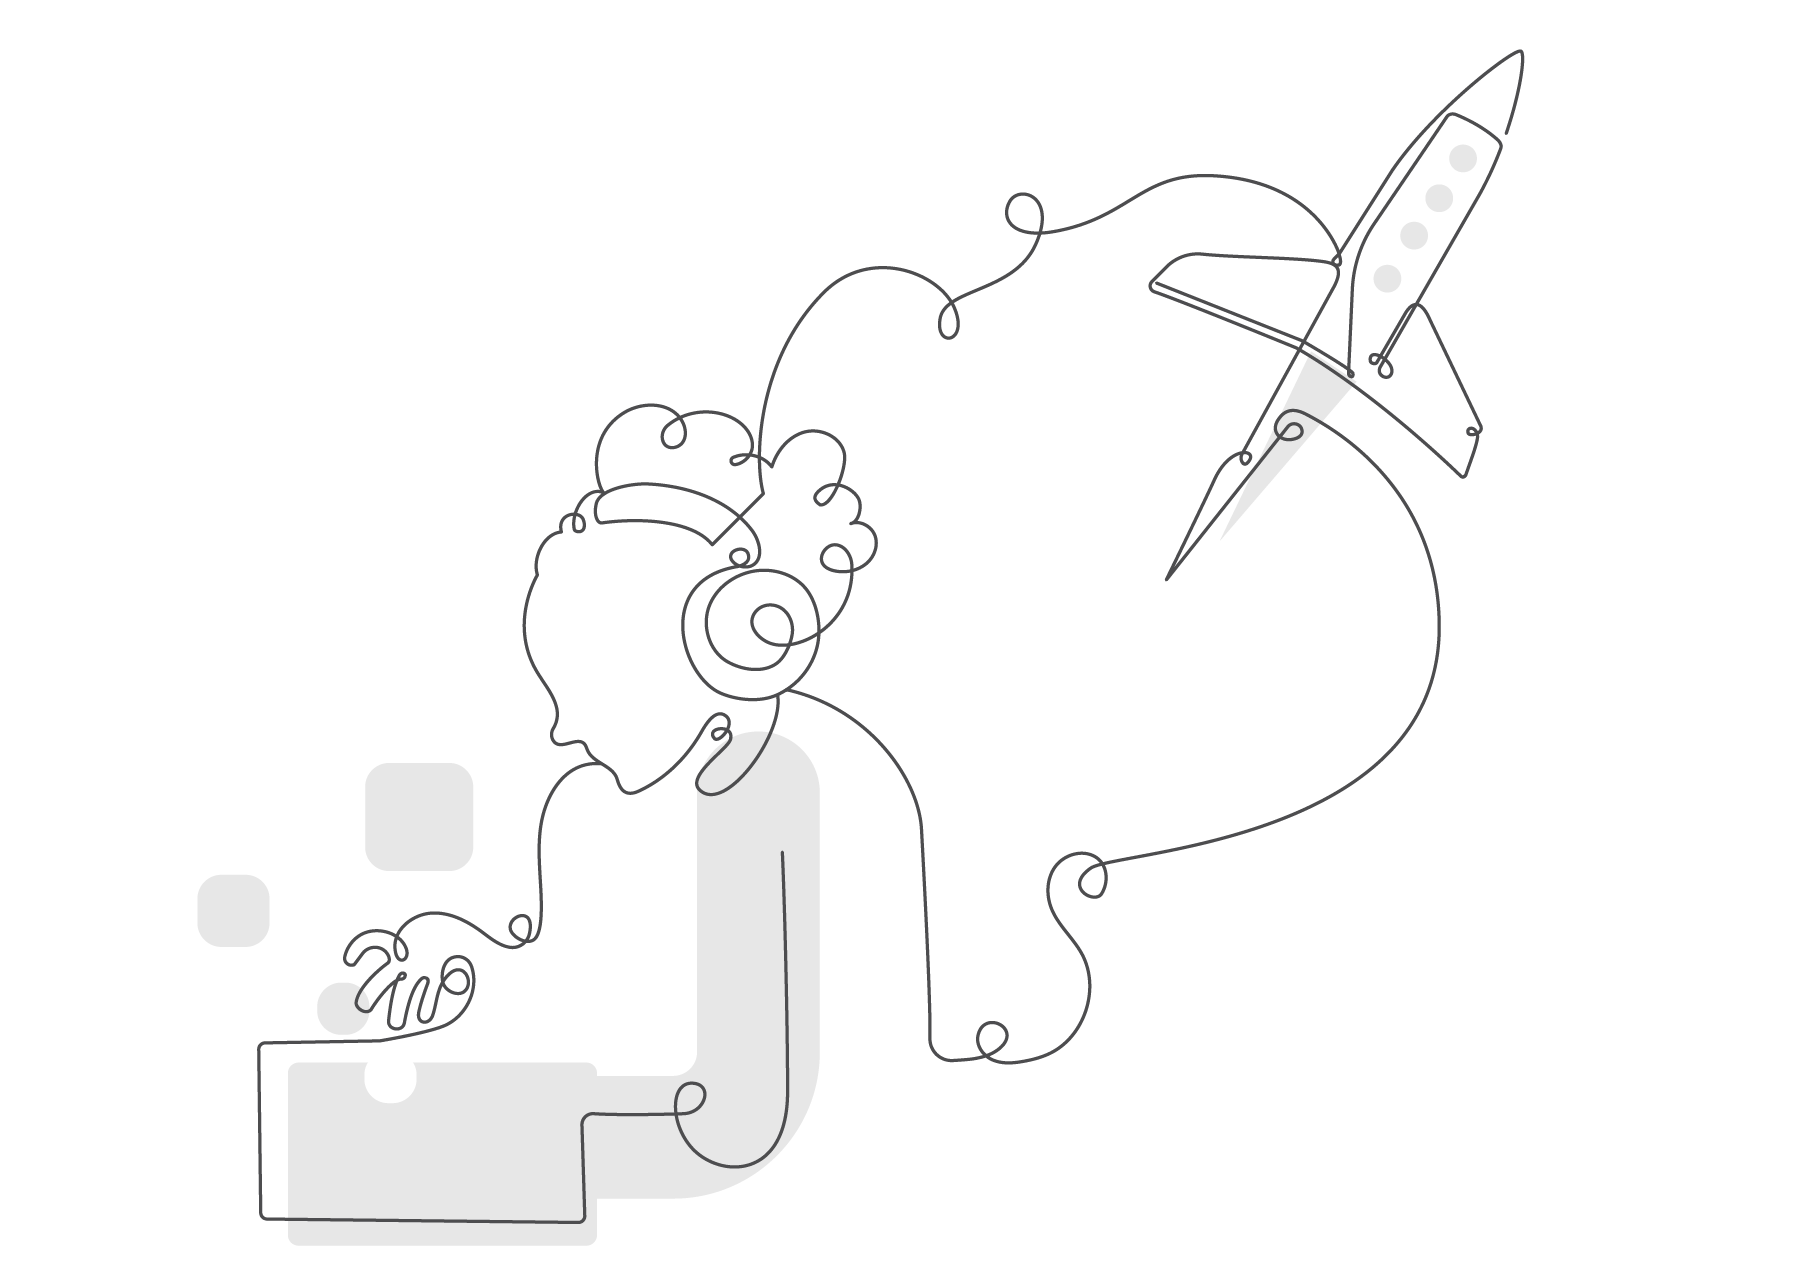 Line drawing of a person using a laptop, with headphones and a line illustration of a rocket launching above their head, symbolizing creativity or inspiration in Boost Reading.